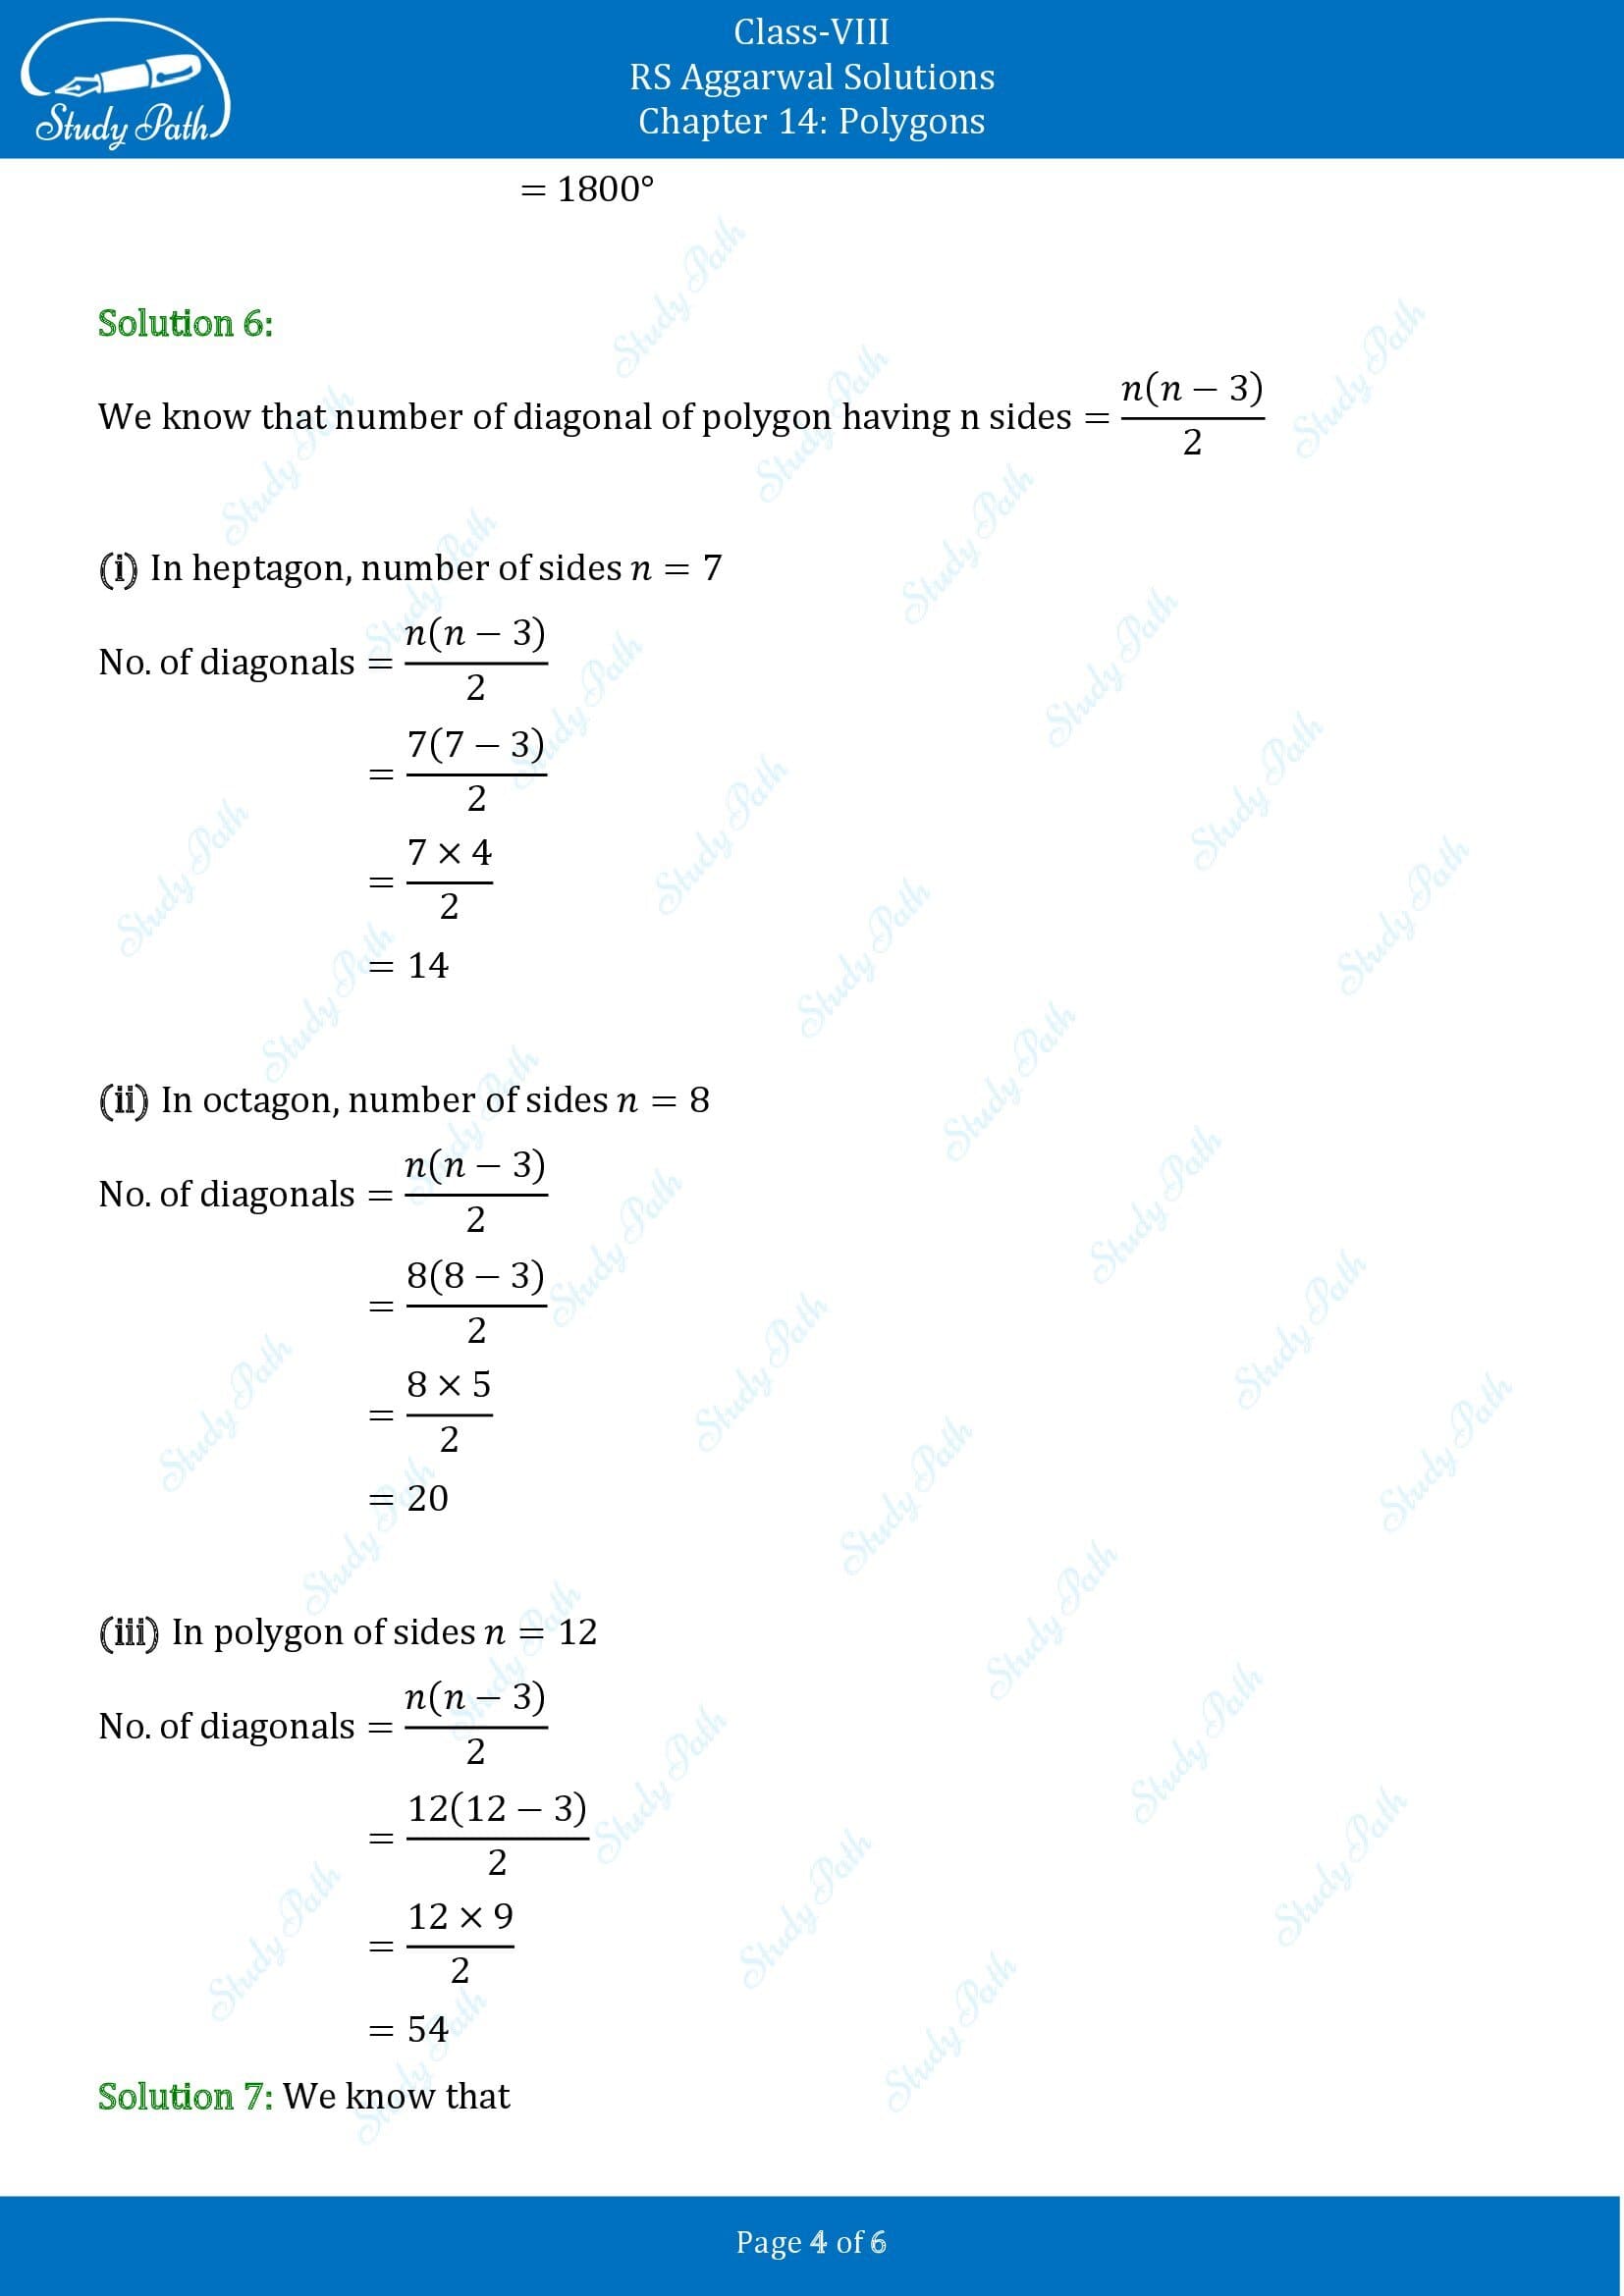 RS Aggarwal Solutions Class 8 Chapter 14 Polygons Exercise 14A 00004